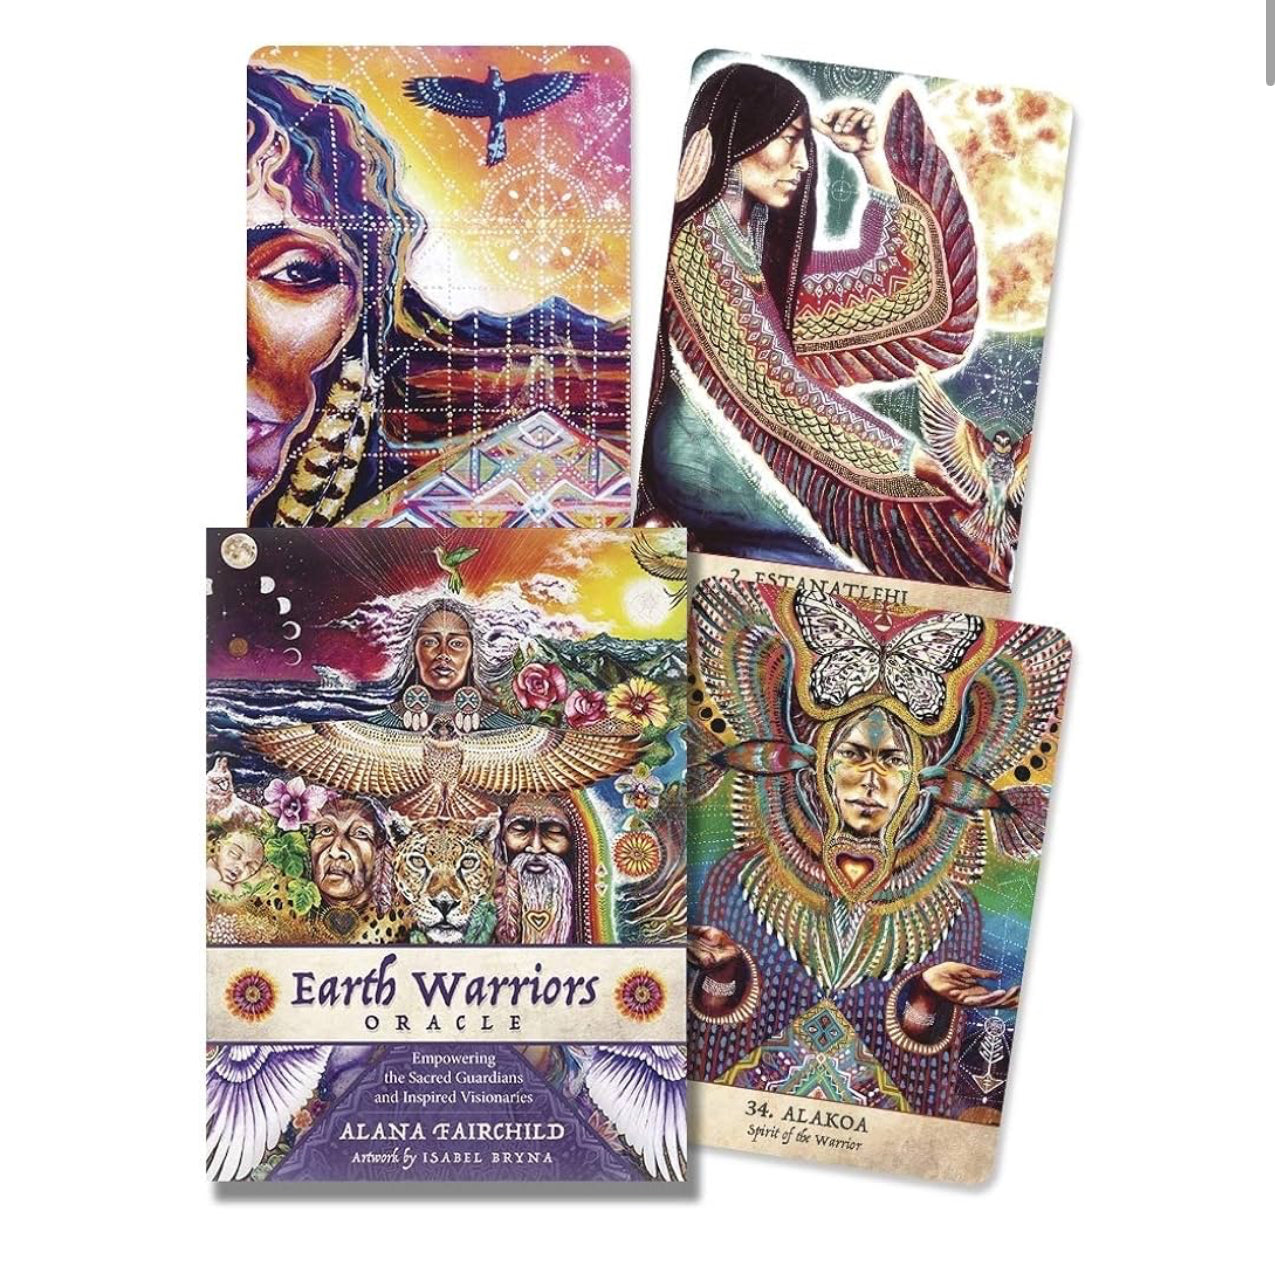 Earth Warriors Oracle: Second Edition (Earth Warriors Oracle, 1)